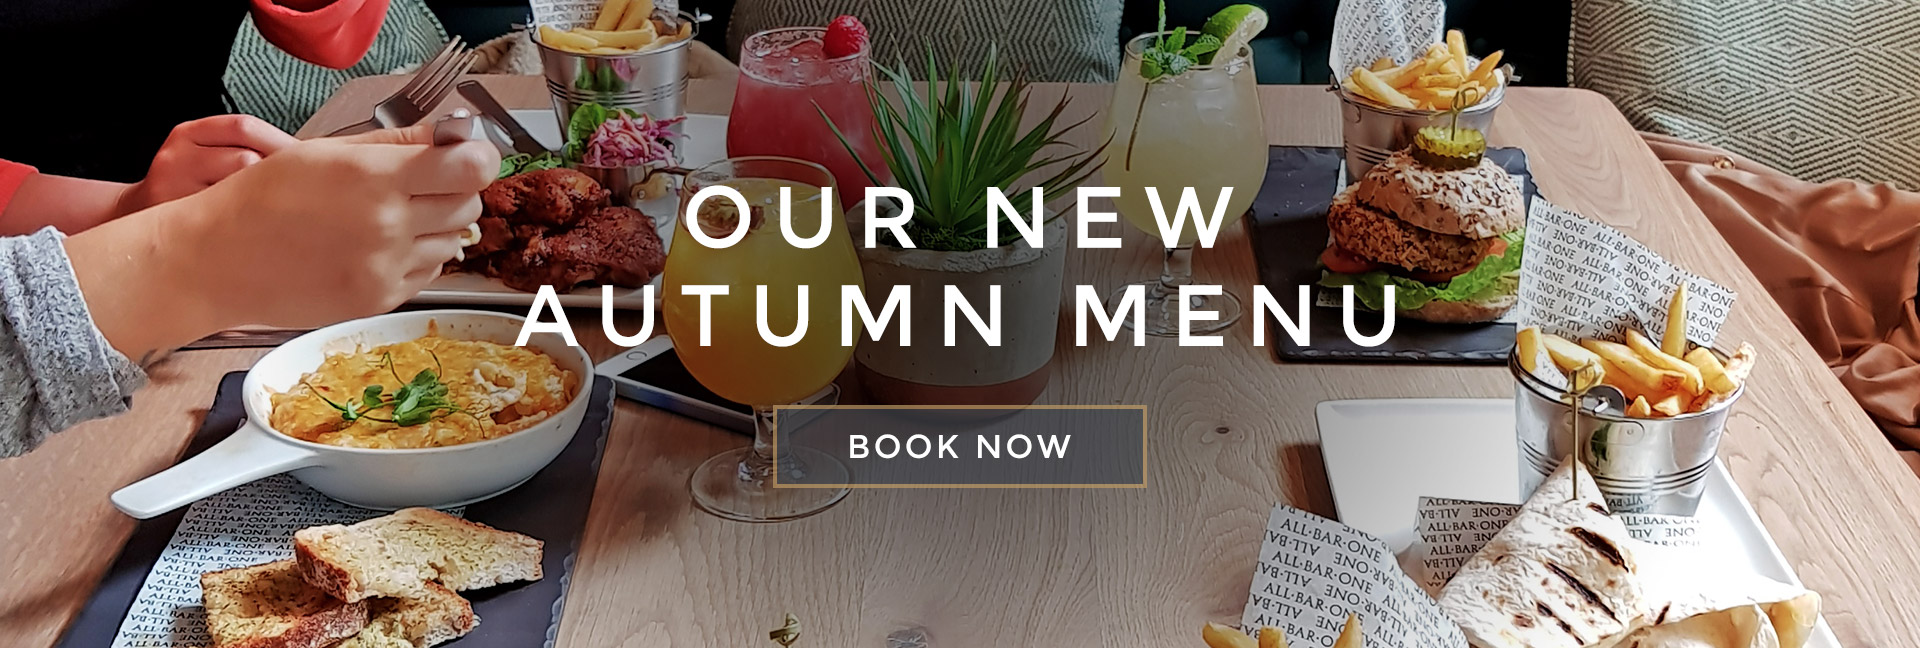 Our new Autumn menu at All Bar One Brighton - Book now